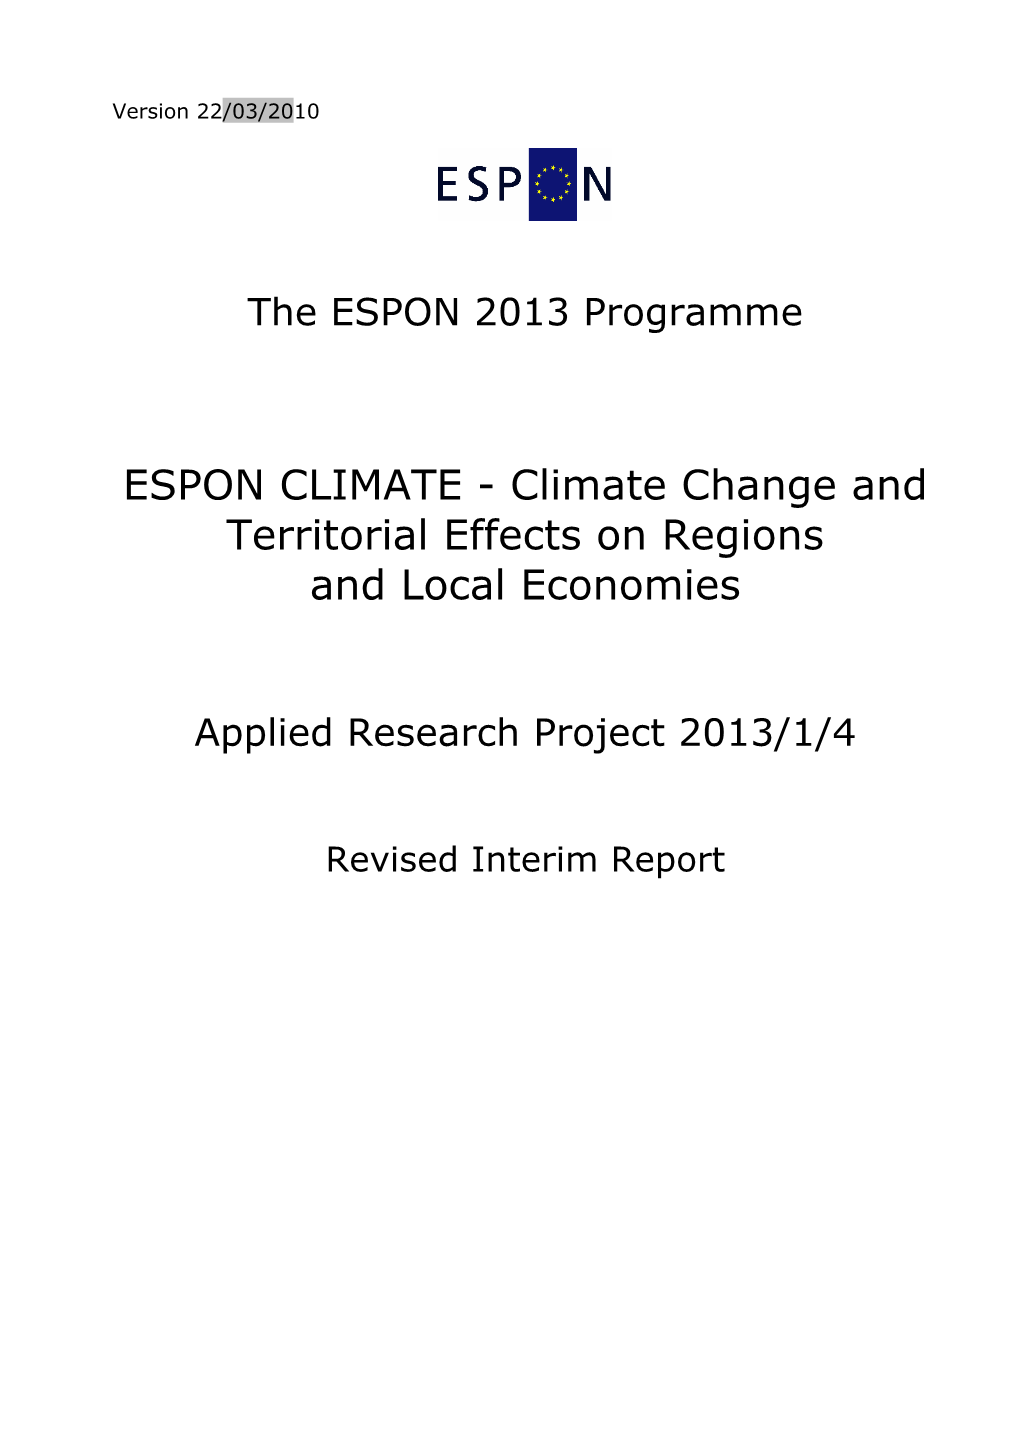 ESPON CLIMATE - Climate Change and Territorial Effects on Regions and Local Economies